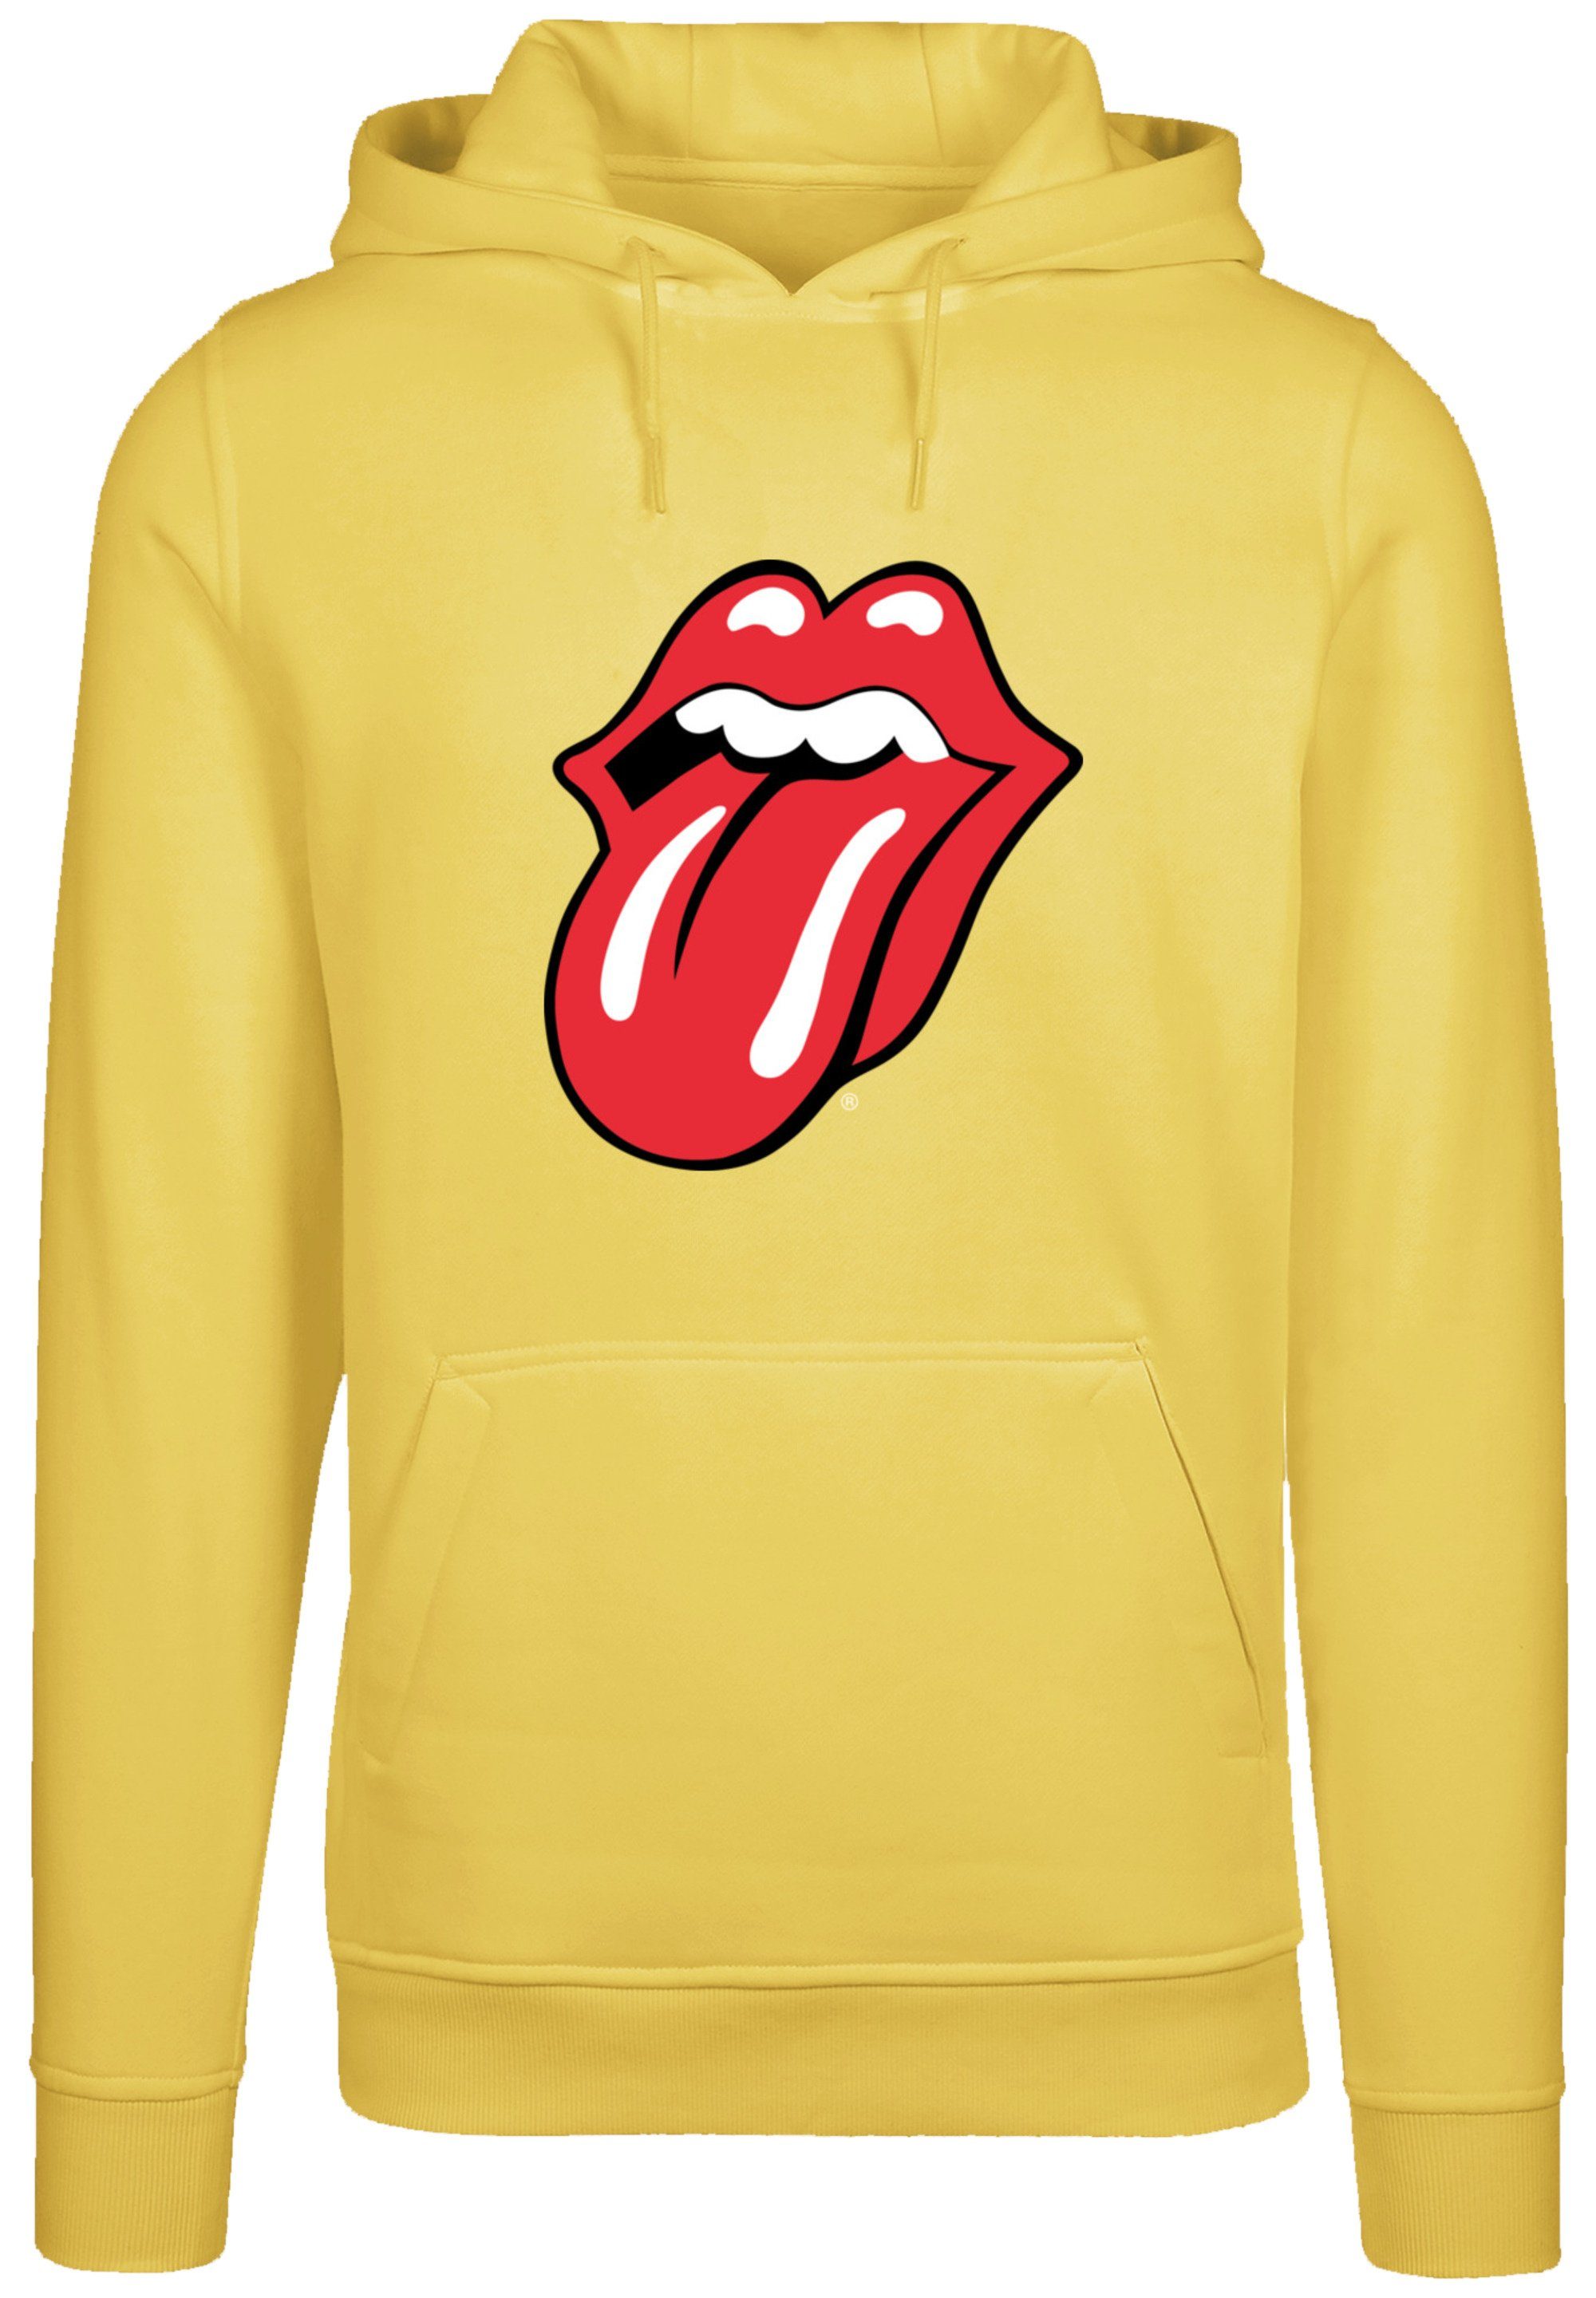 Zunge Kapuzenpullover Warm, Classic yellow Musik Rolling taxi The Rock Bequem Band Stones Hoodie, F4NT4STIC